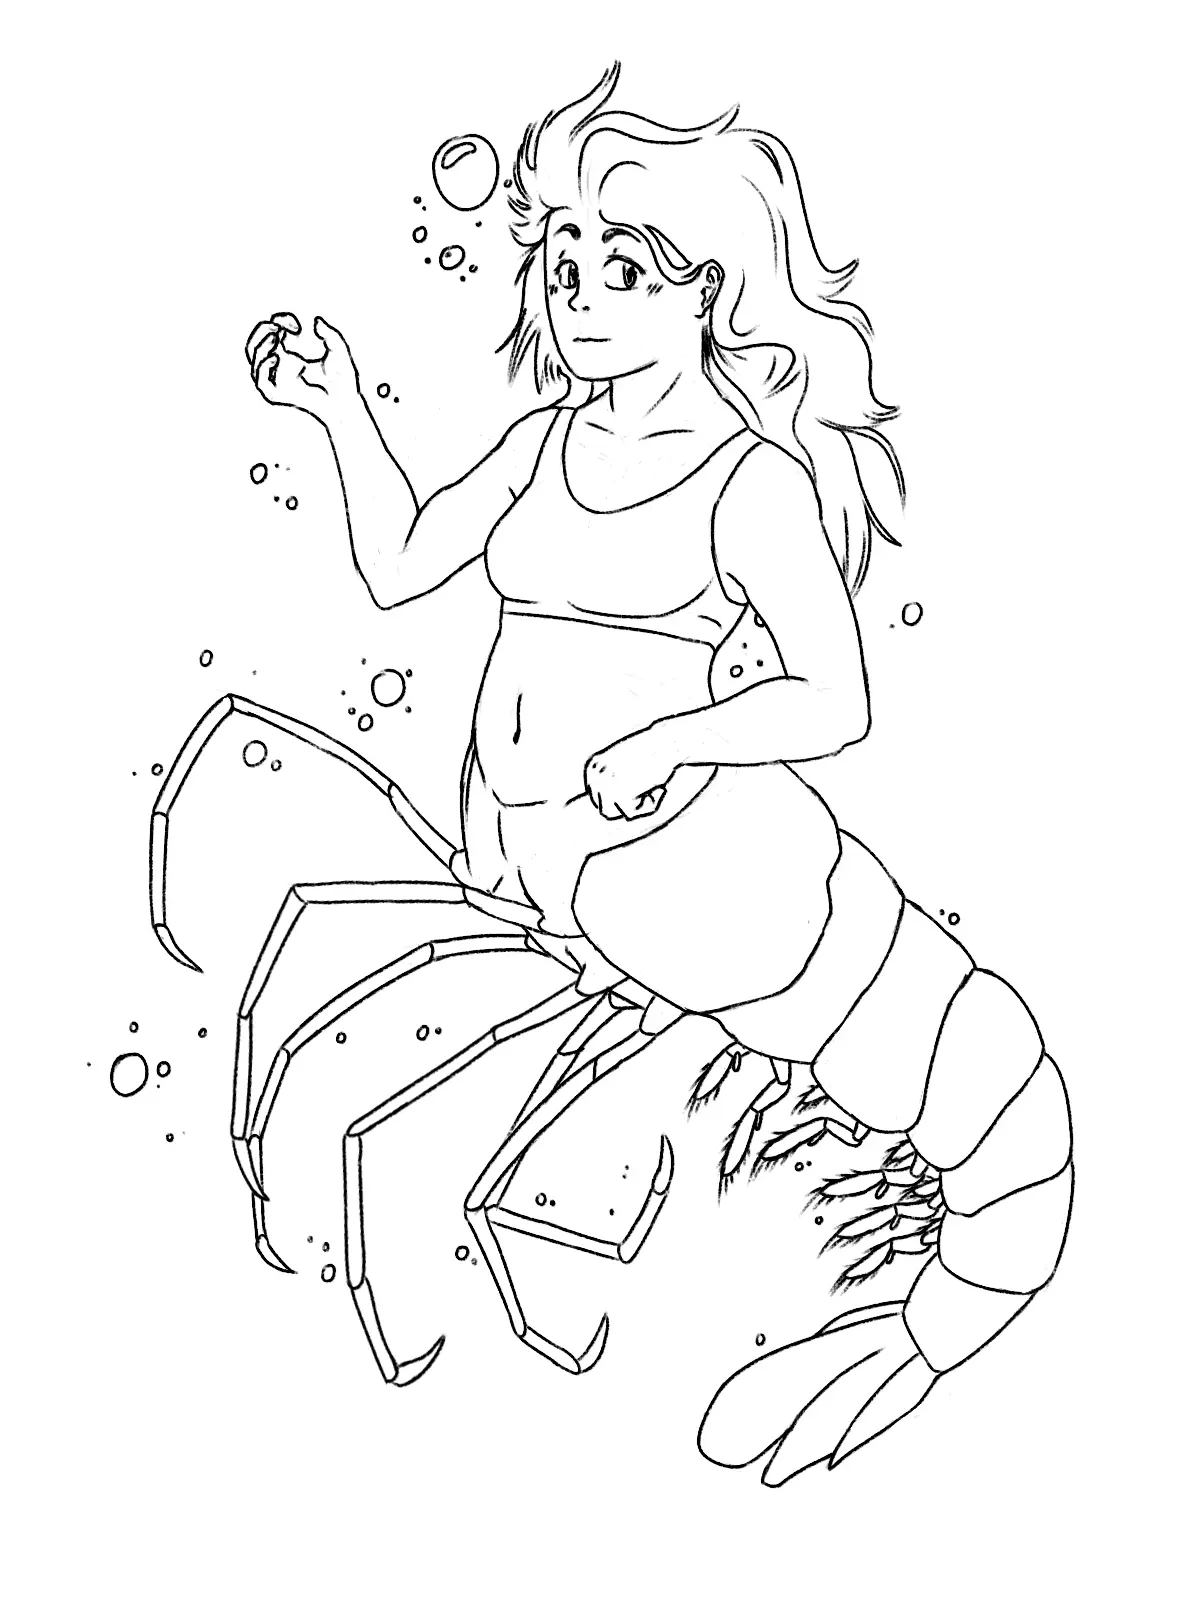 A Mermaid-like creature, a woman with the lower body of a shrimp instead of legs.